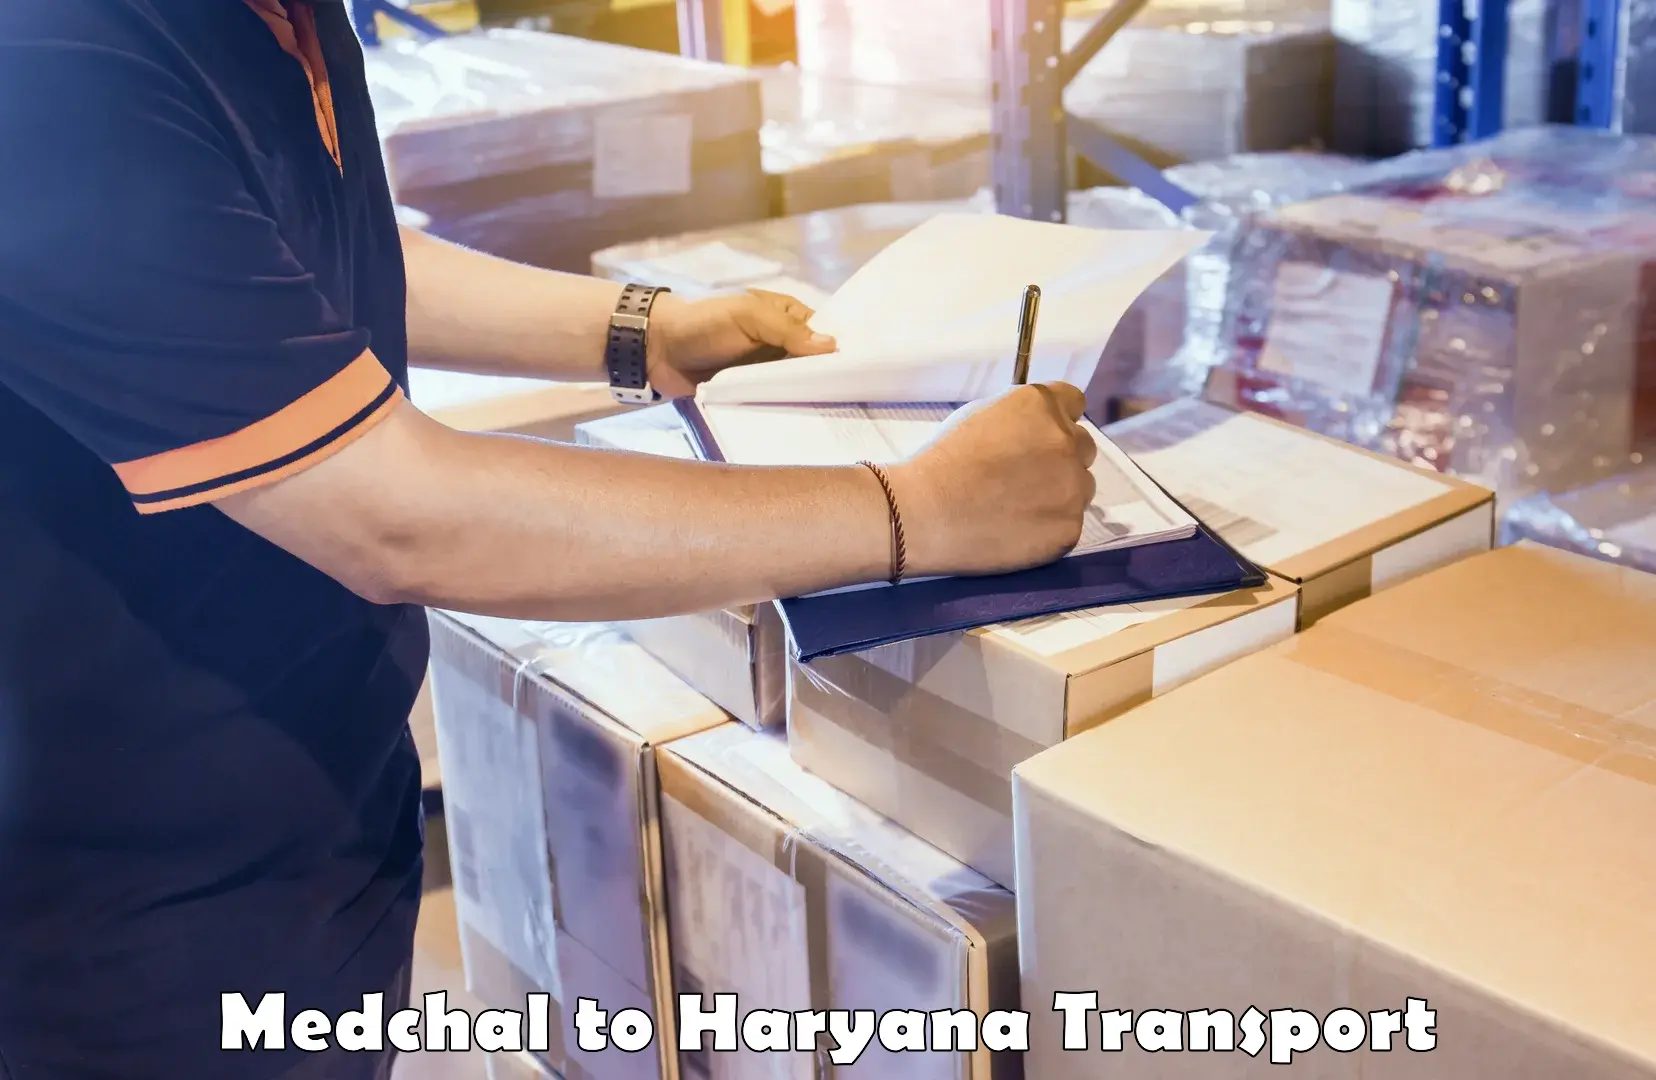 Nearby transport service Medchal to NCR Haryana